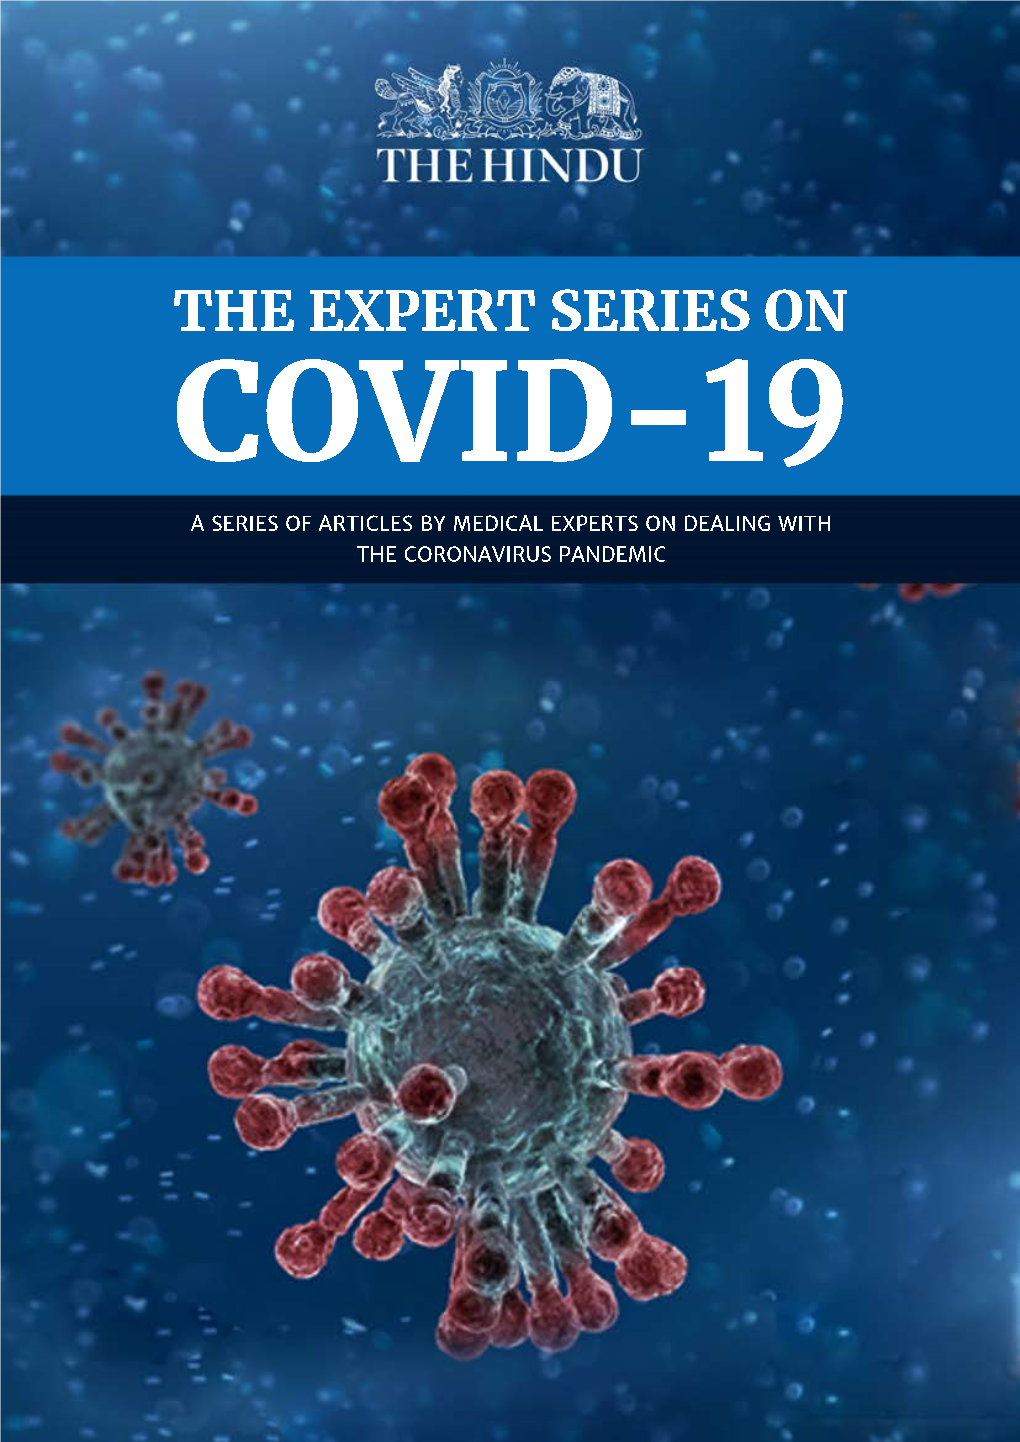 The Expert Series on COVID-19